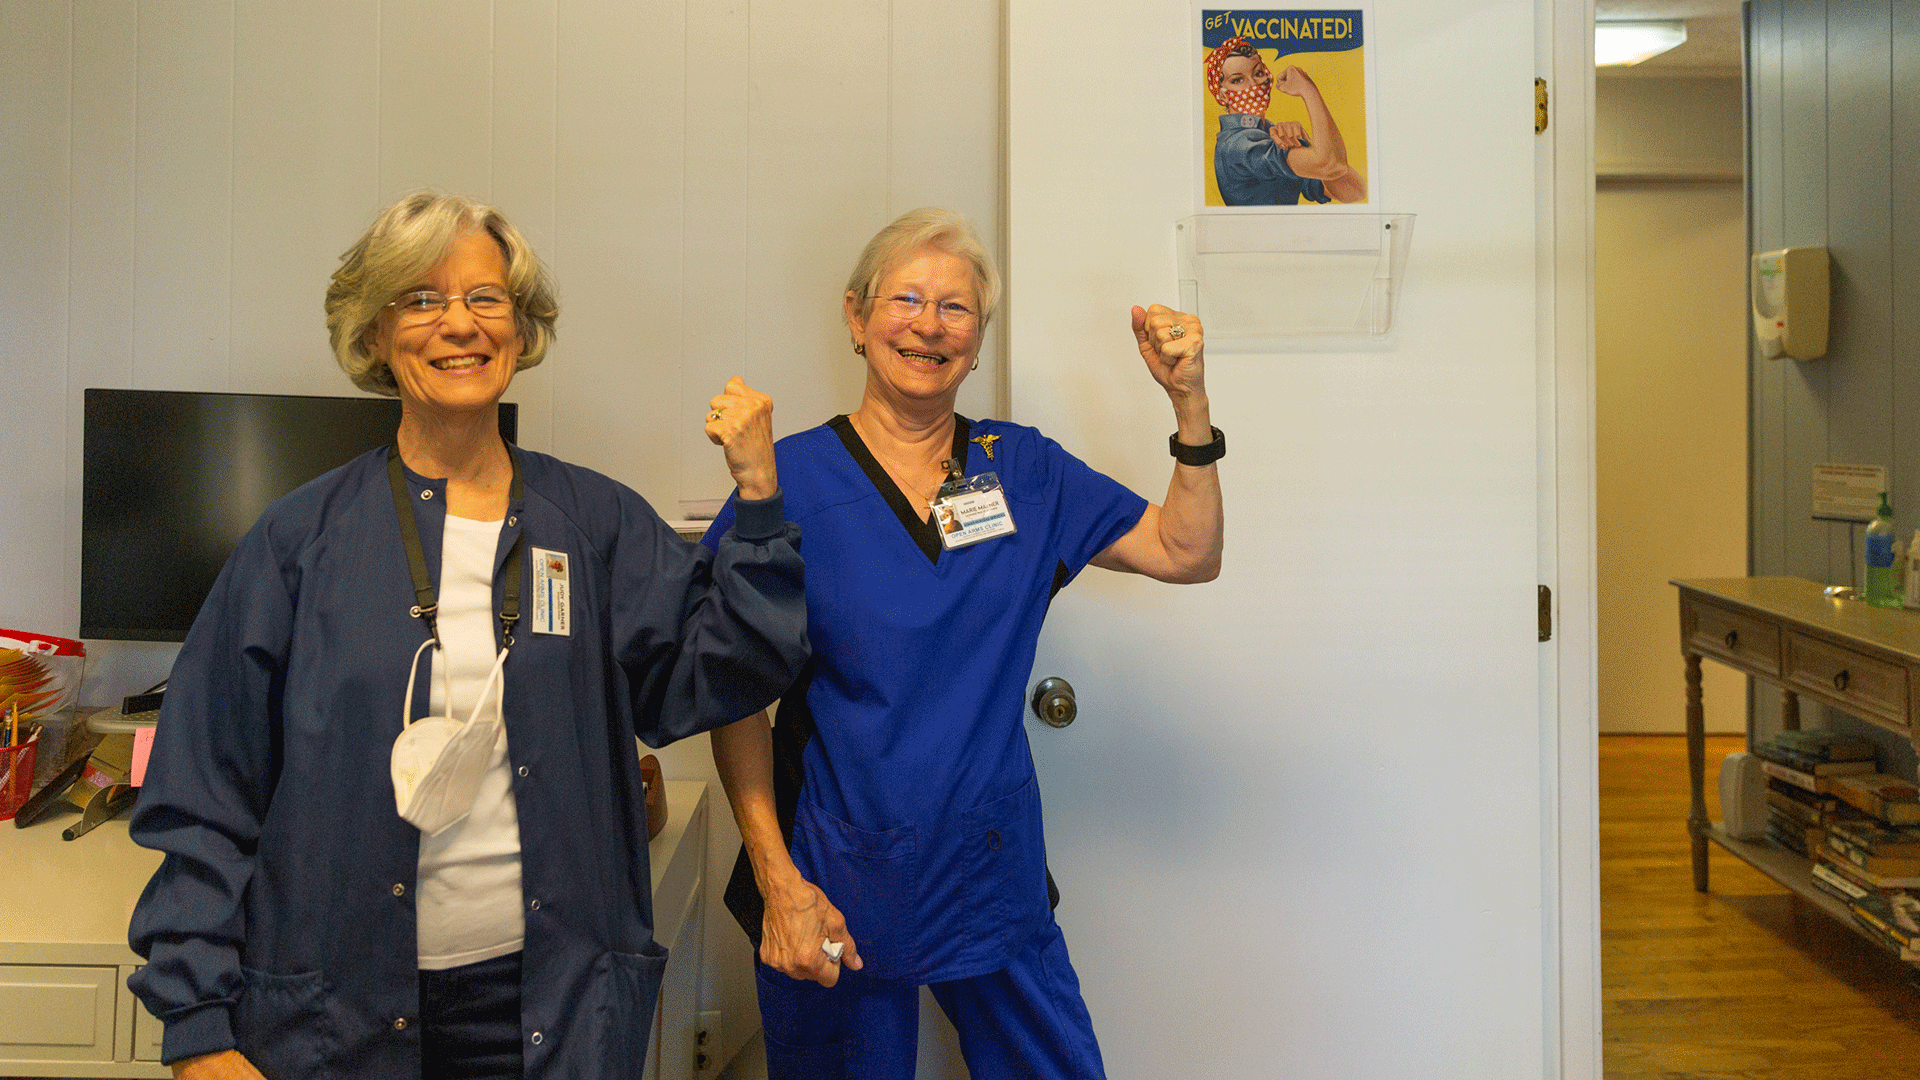 two medical staff posing with a Rosie the Riveter poster to get vaccinated